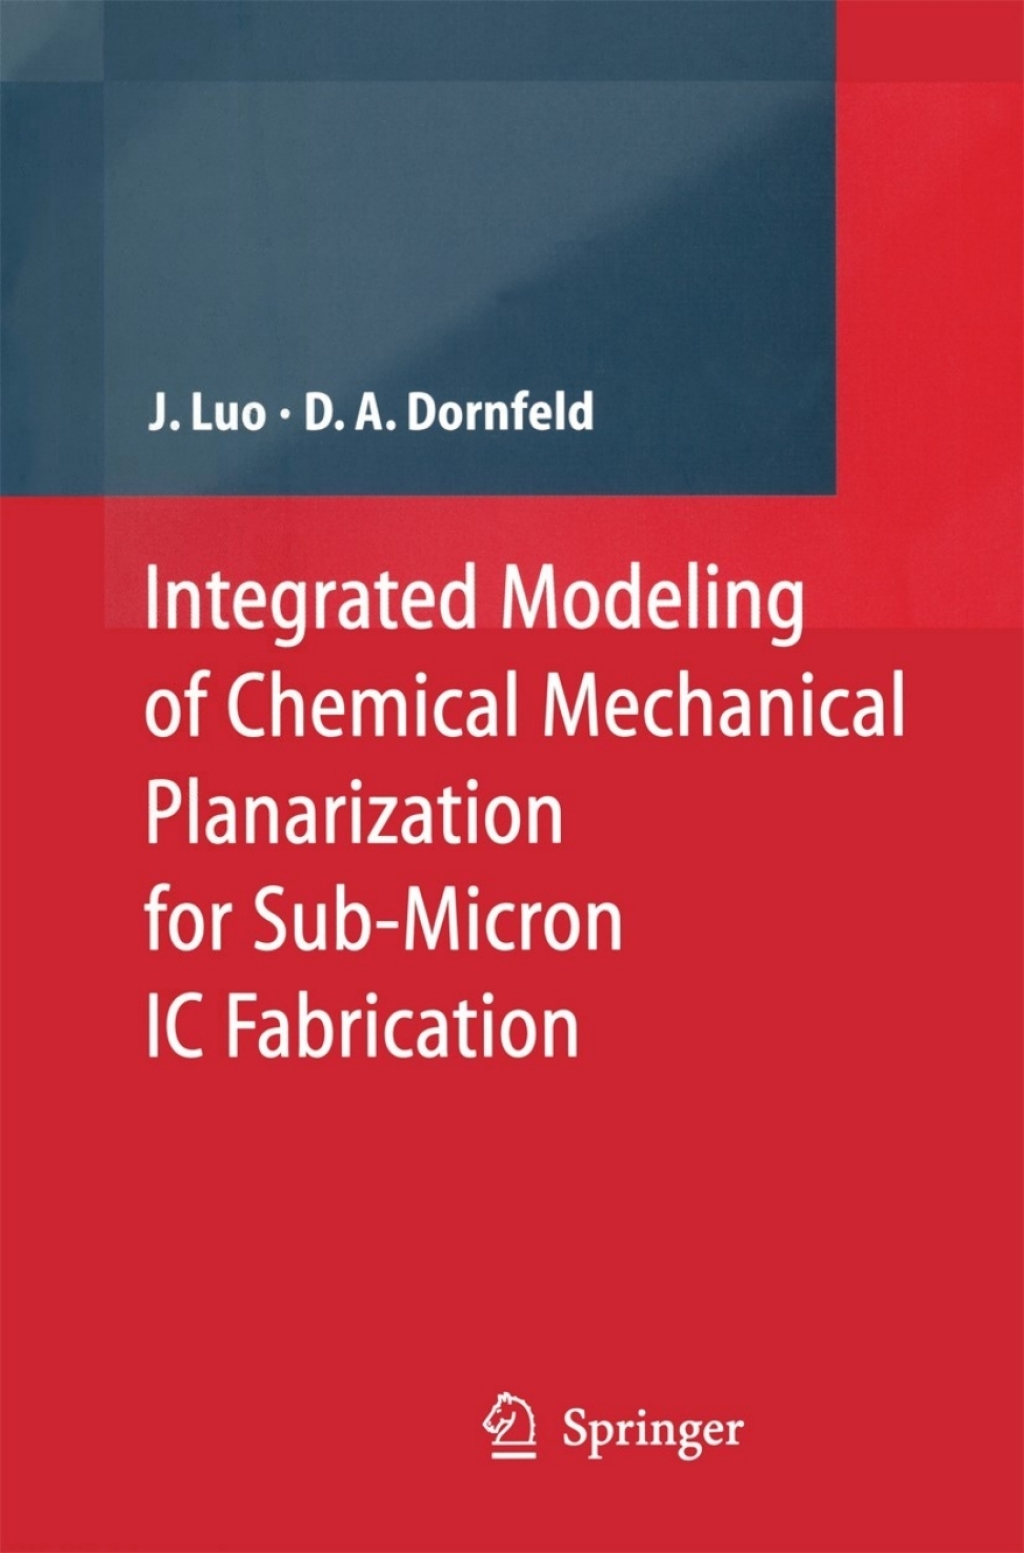 Page Fidelity Integrated Modeling of Chemical Mechanical Planarization for Sub-Micron IC Fabrication